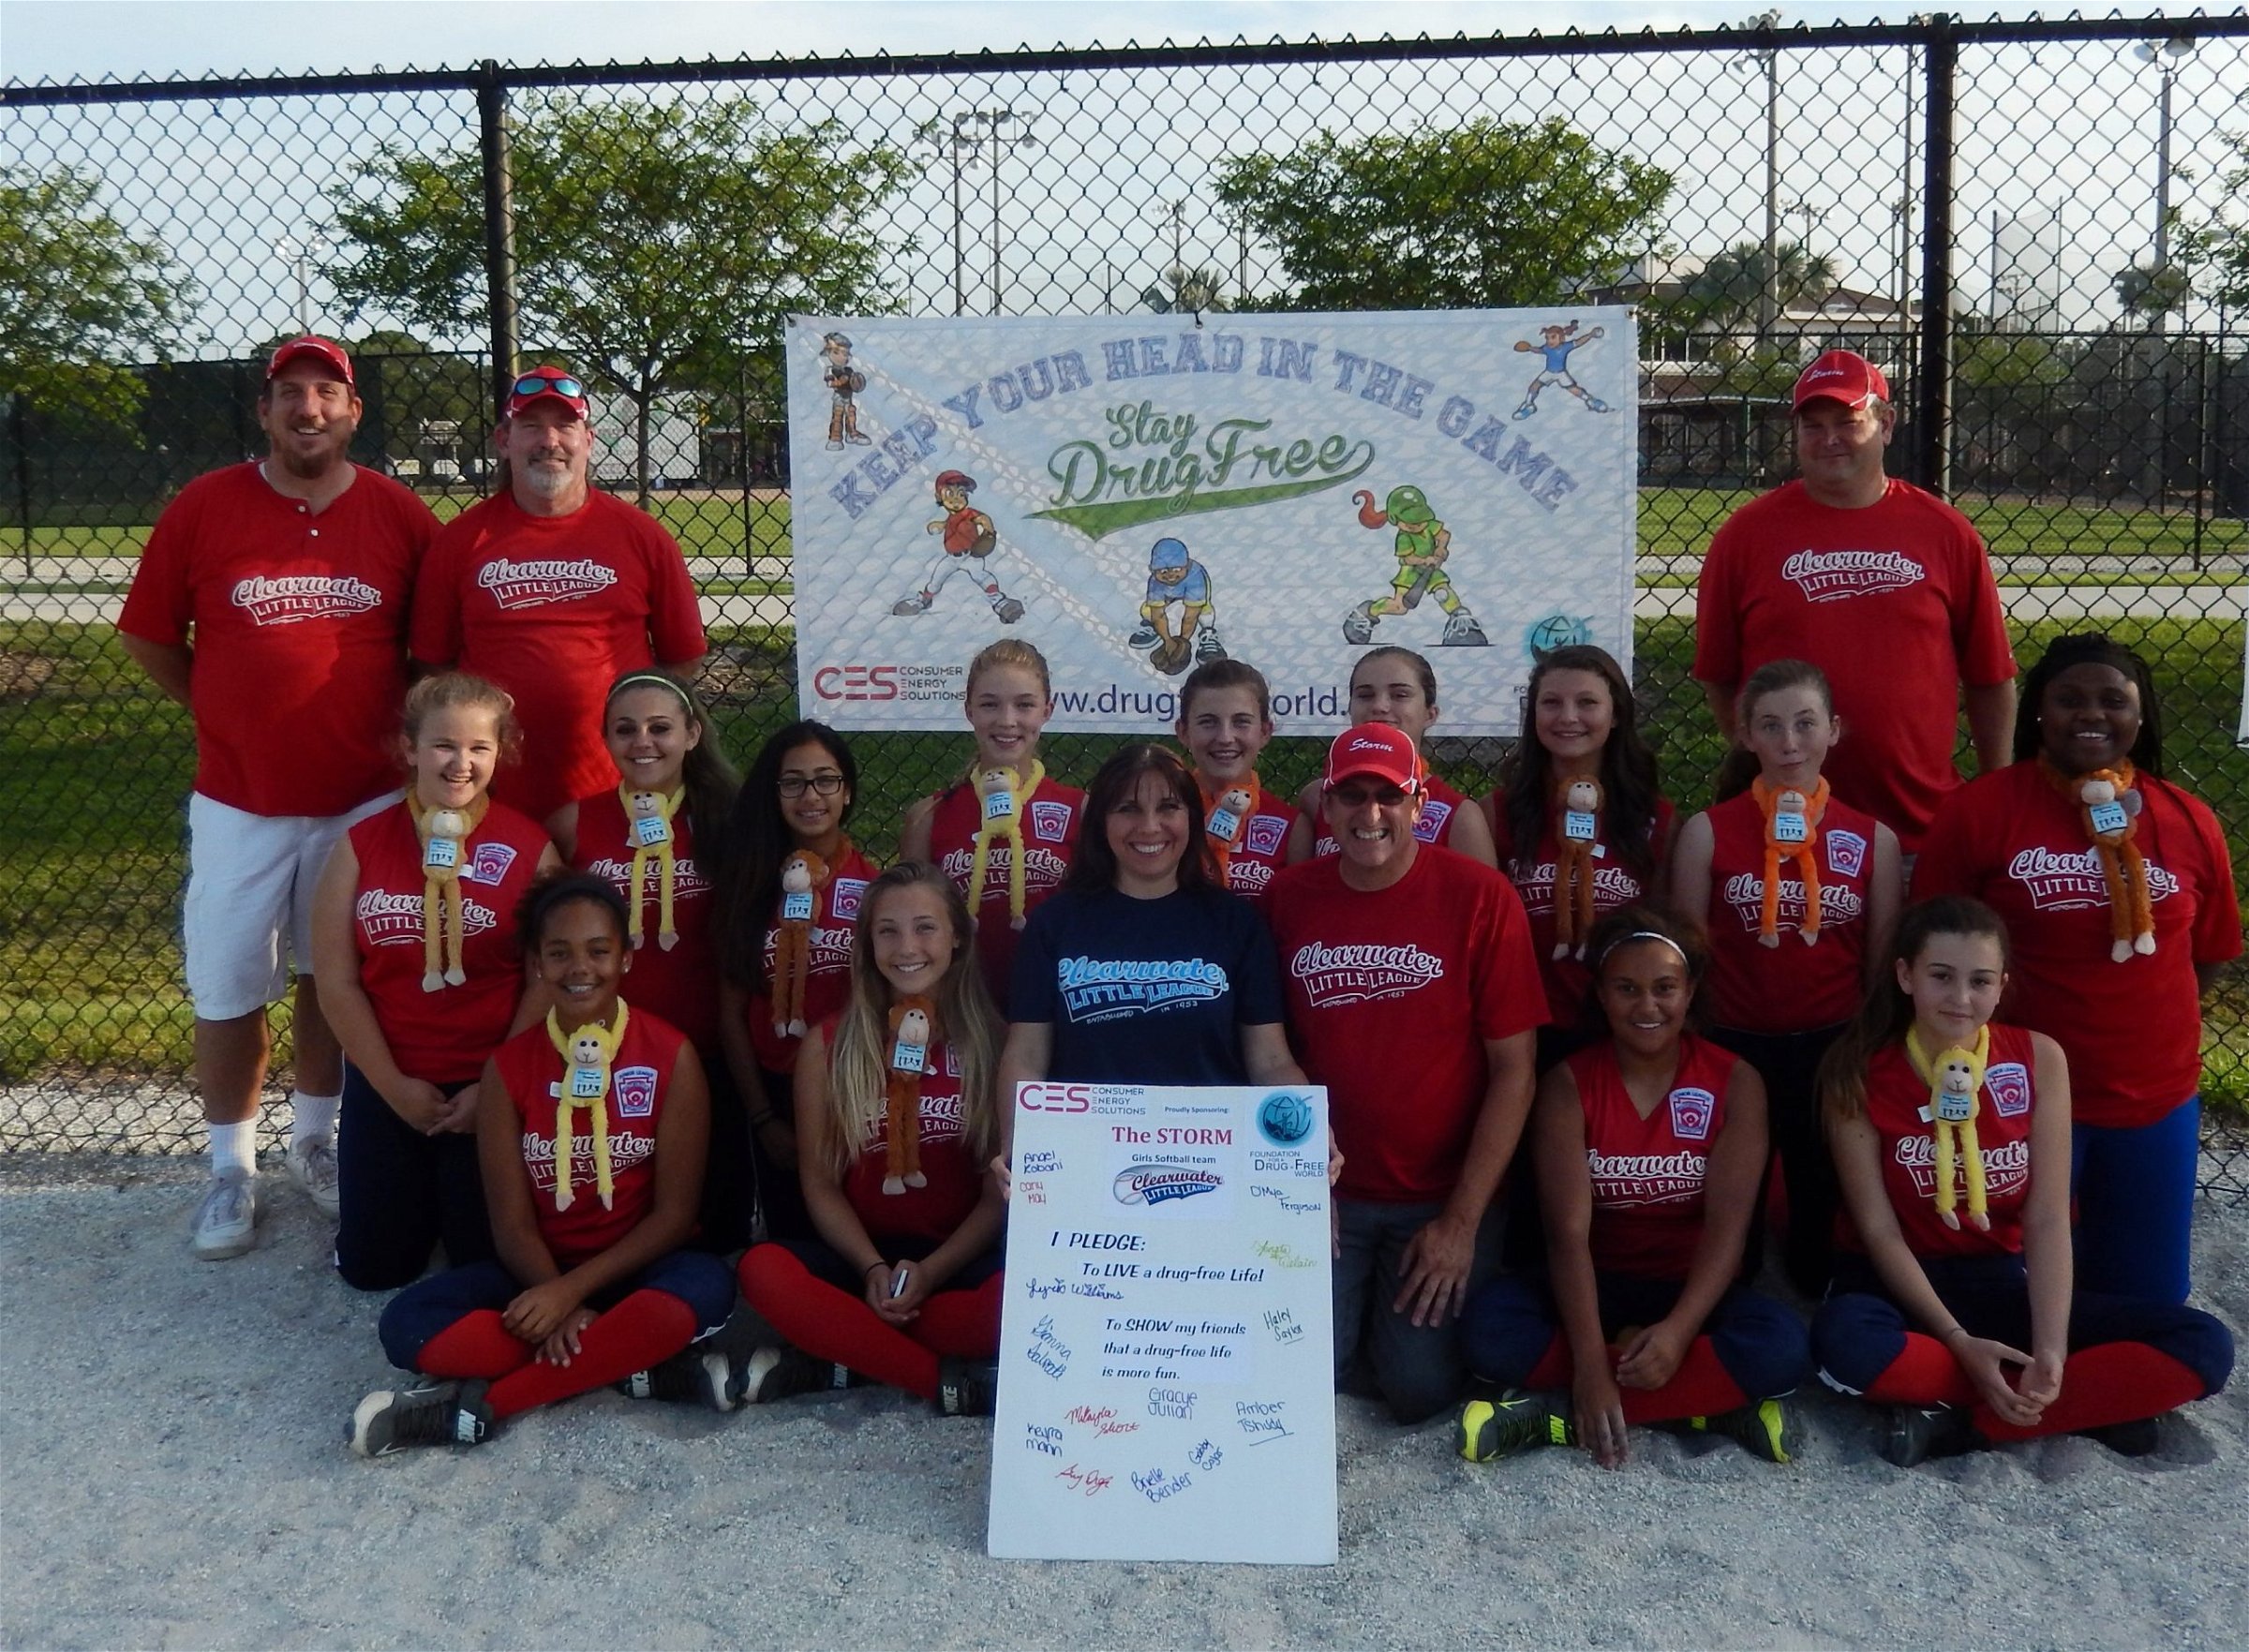 Clearwater Girls Softball Team - THE STORM